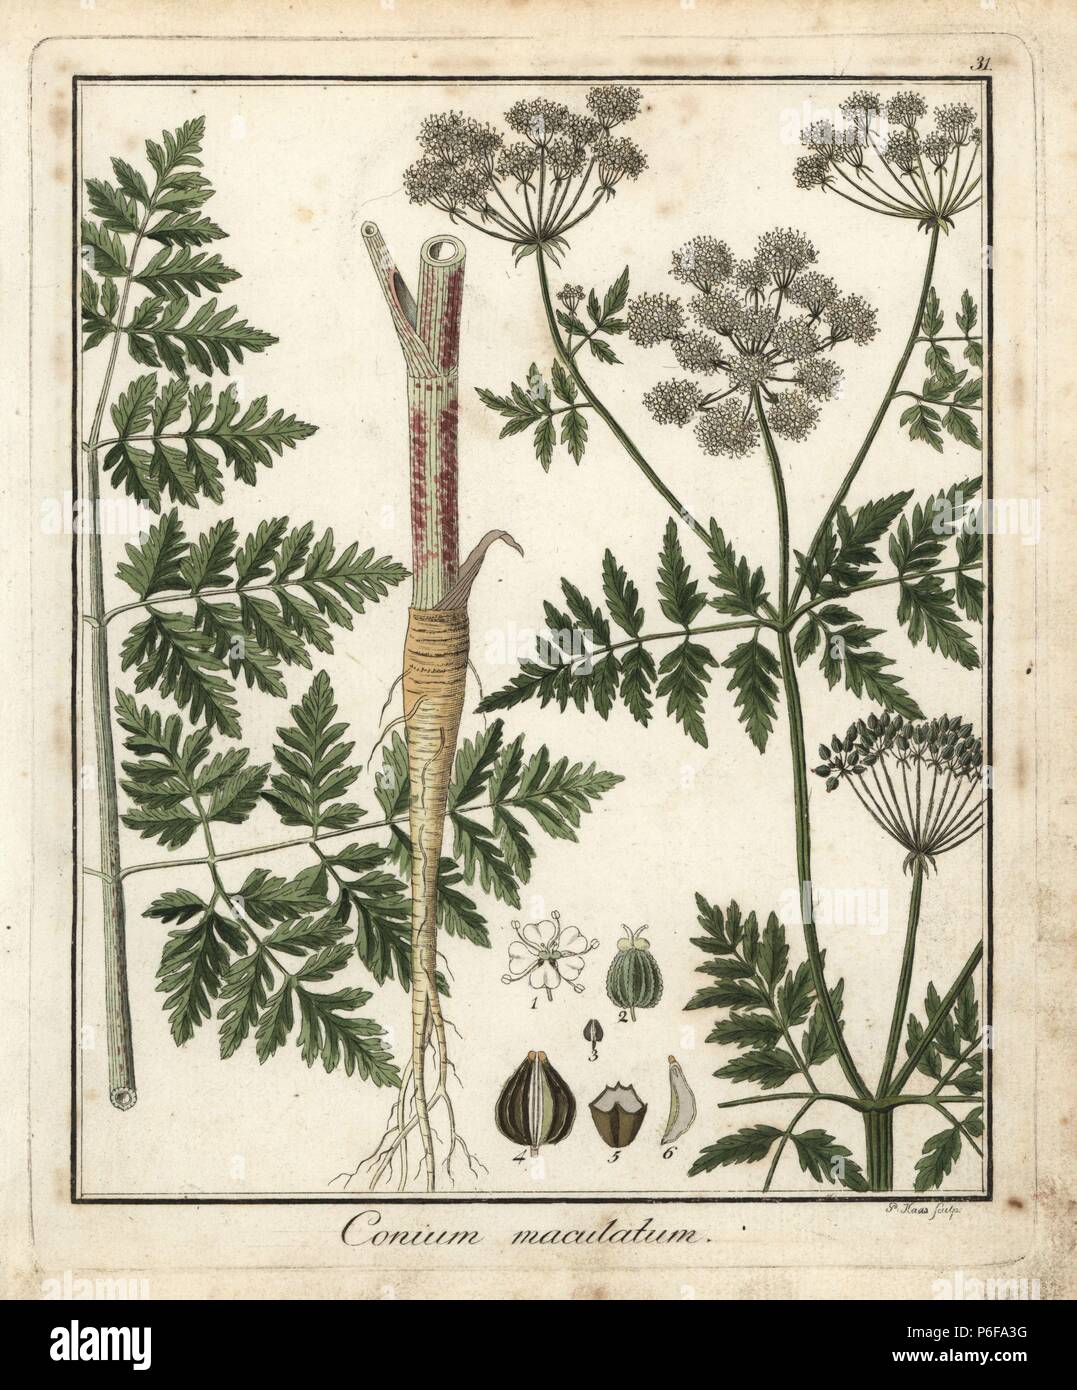 Hemlock, Conium maculatum. Handcoloured copperplate engraving by P. Haas from Dr. Friedrich Gottlob Hayne's Medical Botany, Berlin, 1822. Hayne (1763-1832) was a German botanist, apothecary and professor of pharmaceutical botany at Berlin University. Stock Photo